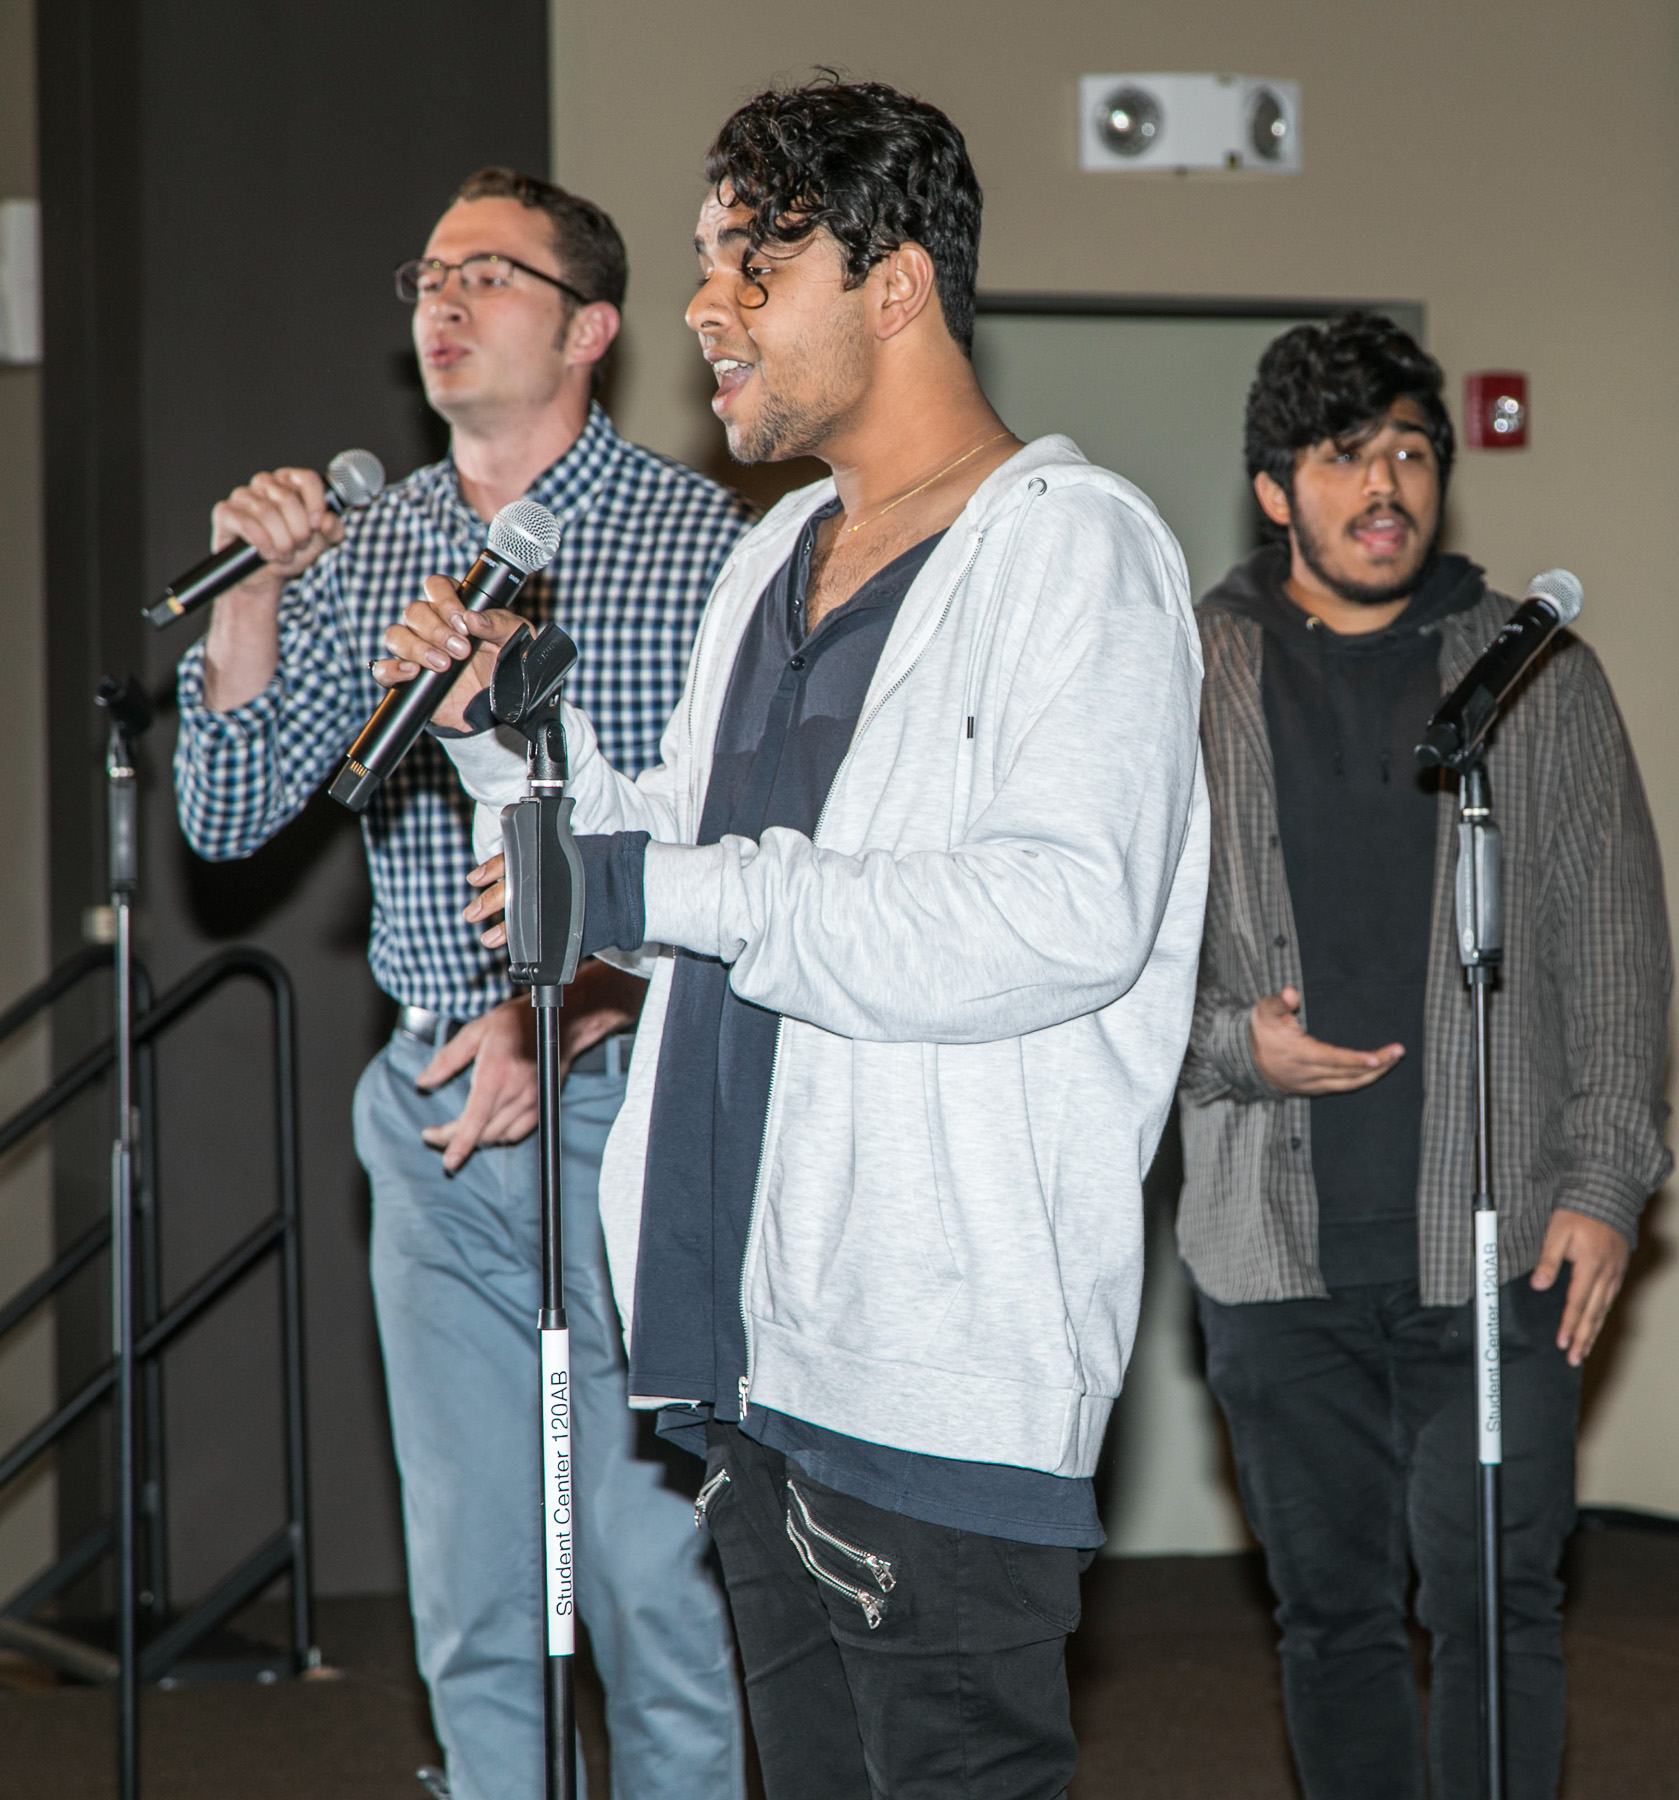 The DePaul Men's A Cappella group performs for students and family members attending the Family Weekend Kickoff celebration. (DePaul University/Jamie Moncrief)